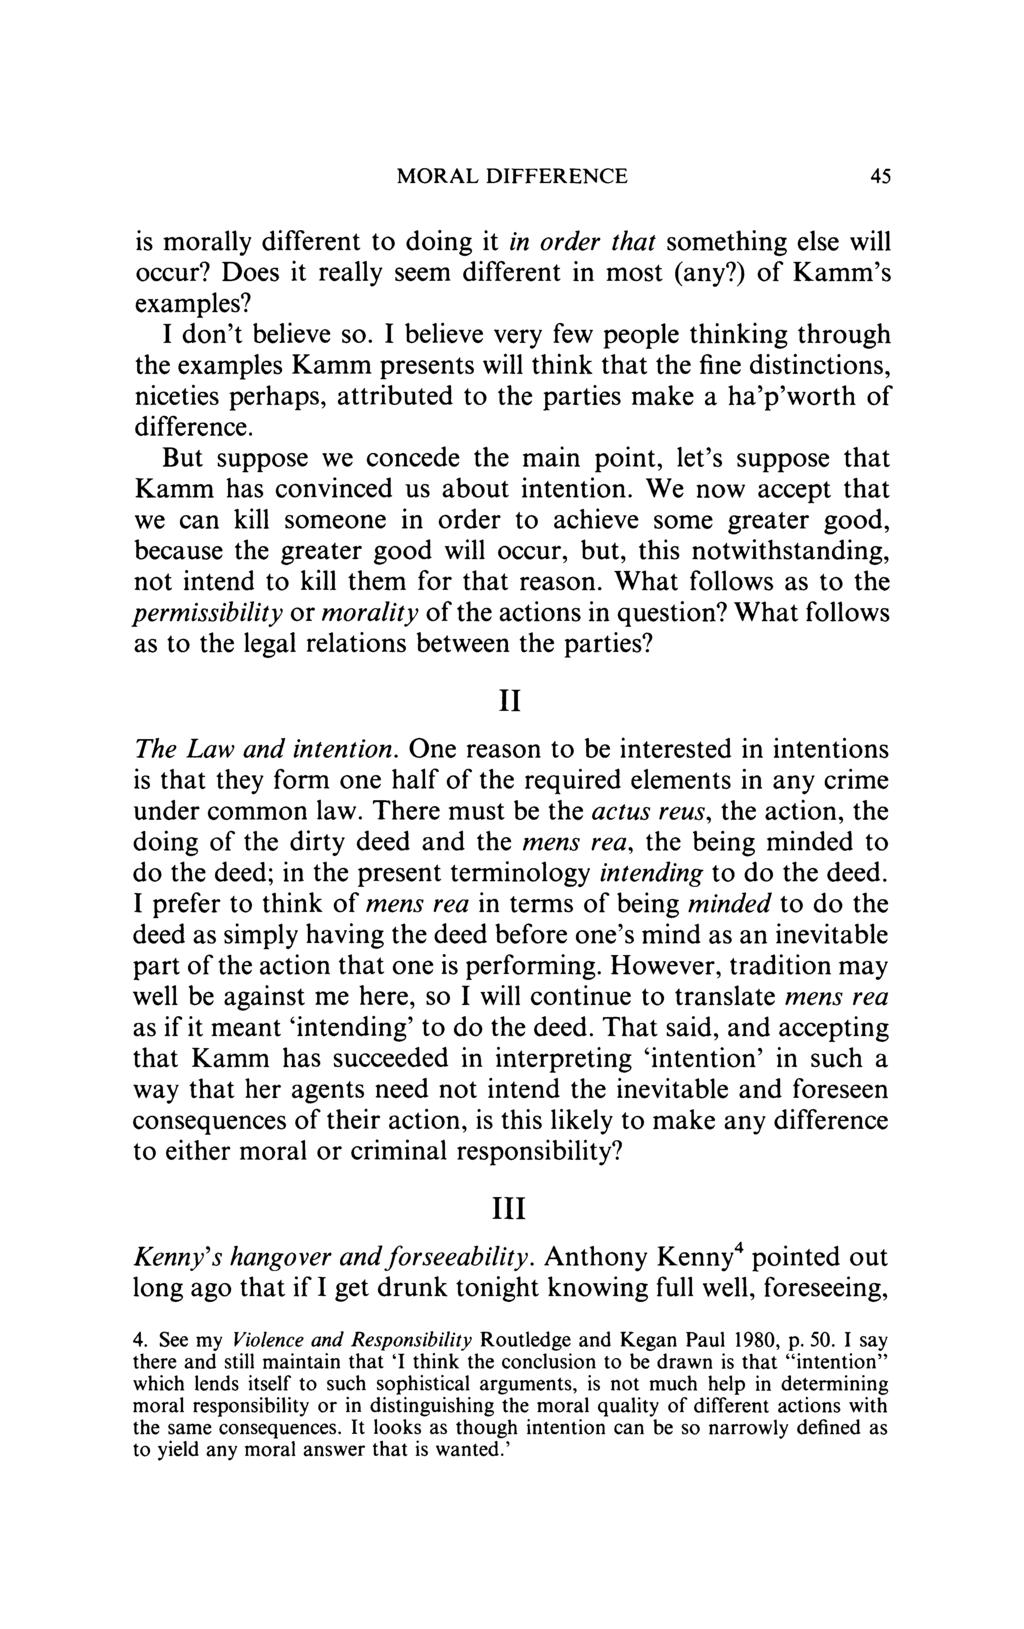 MORAL DIFFERENCE 45 is morally different to doing it in order that something else will occur? Does it really seem different in most (any?) of Kamm's examples? I don't believe so.